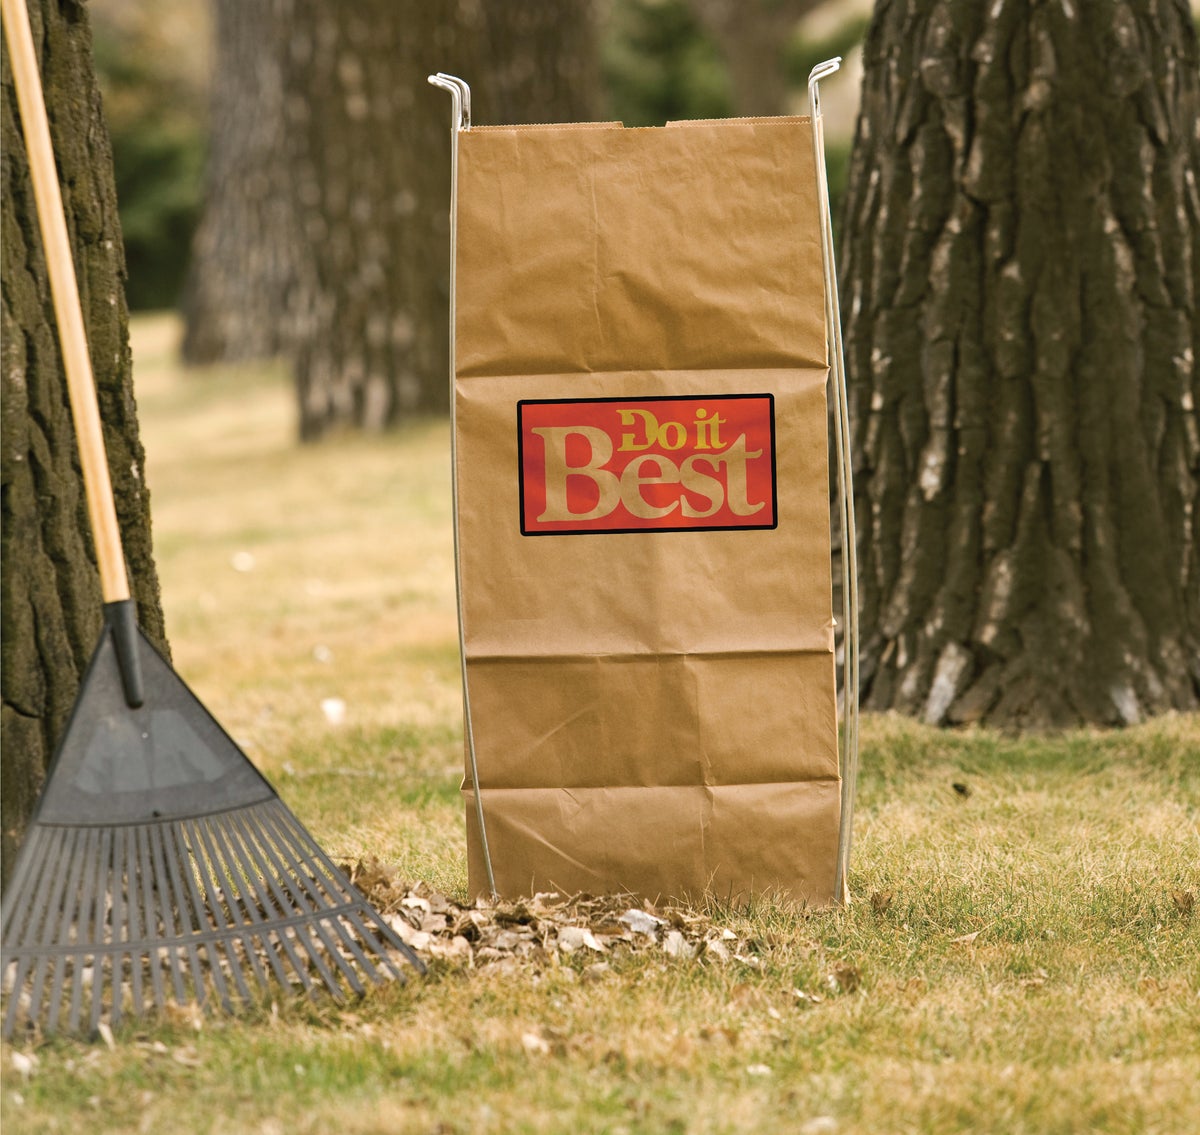 30 Gal.-42 Gal. Lawn and Leaf Trash Bag Holder Opens Bags for Easy Filling  No assembly required, Leaf Collecting Tool B00BGU7XAS - The Home Depot